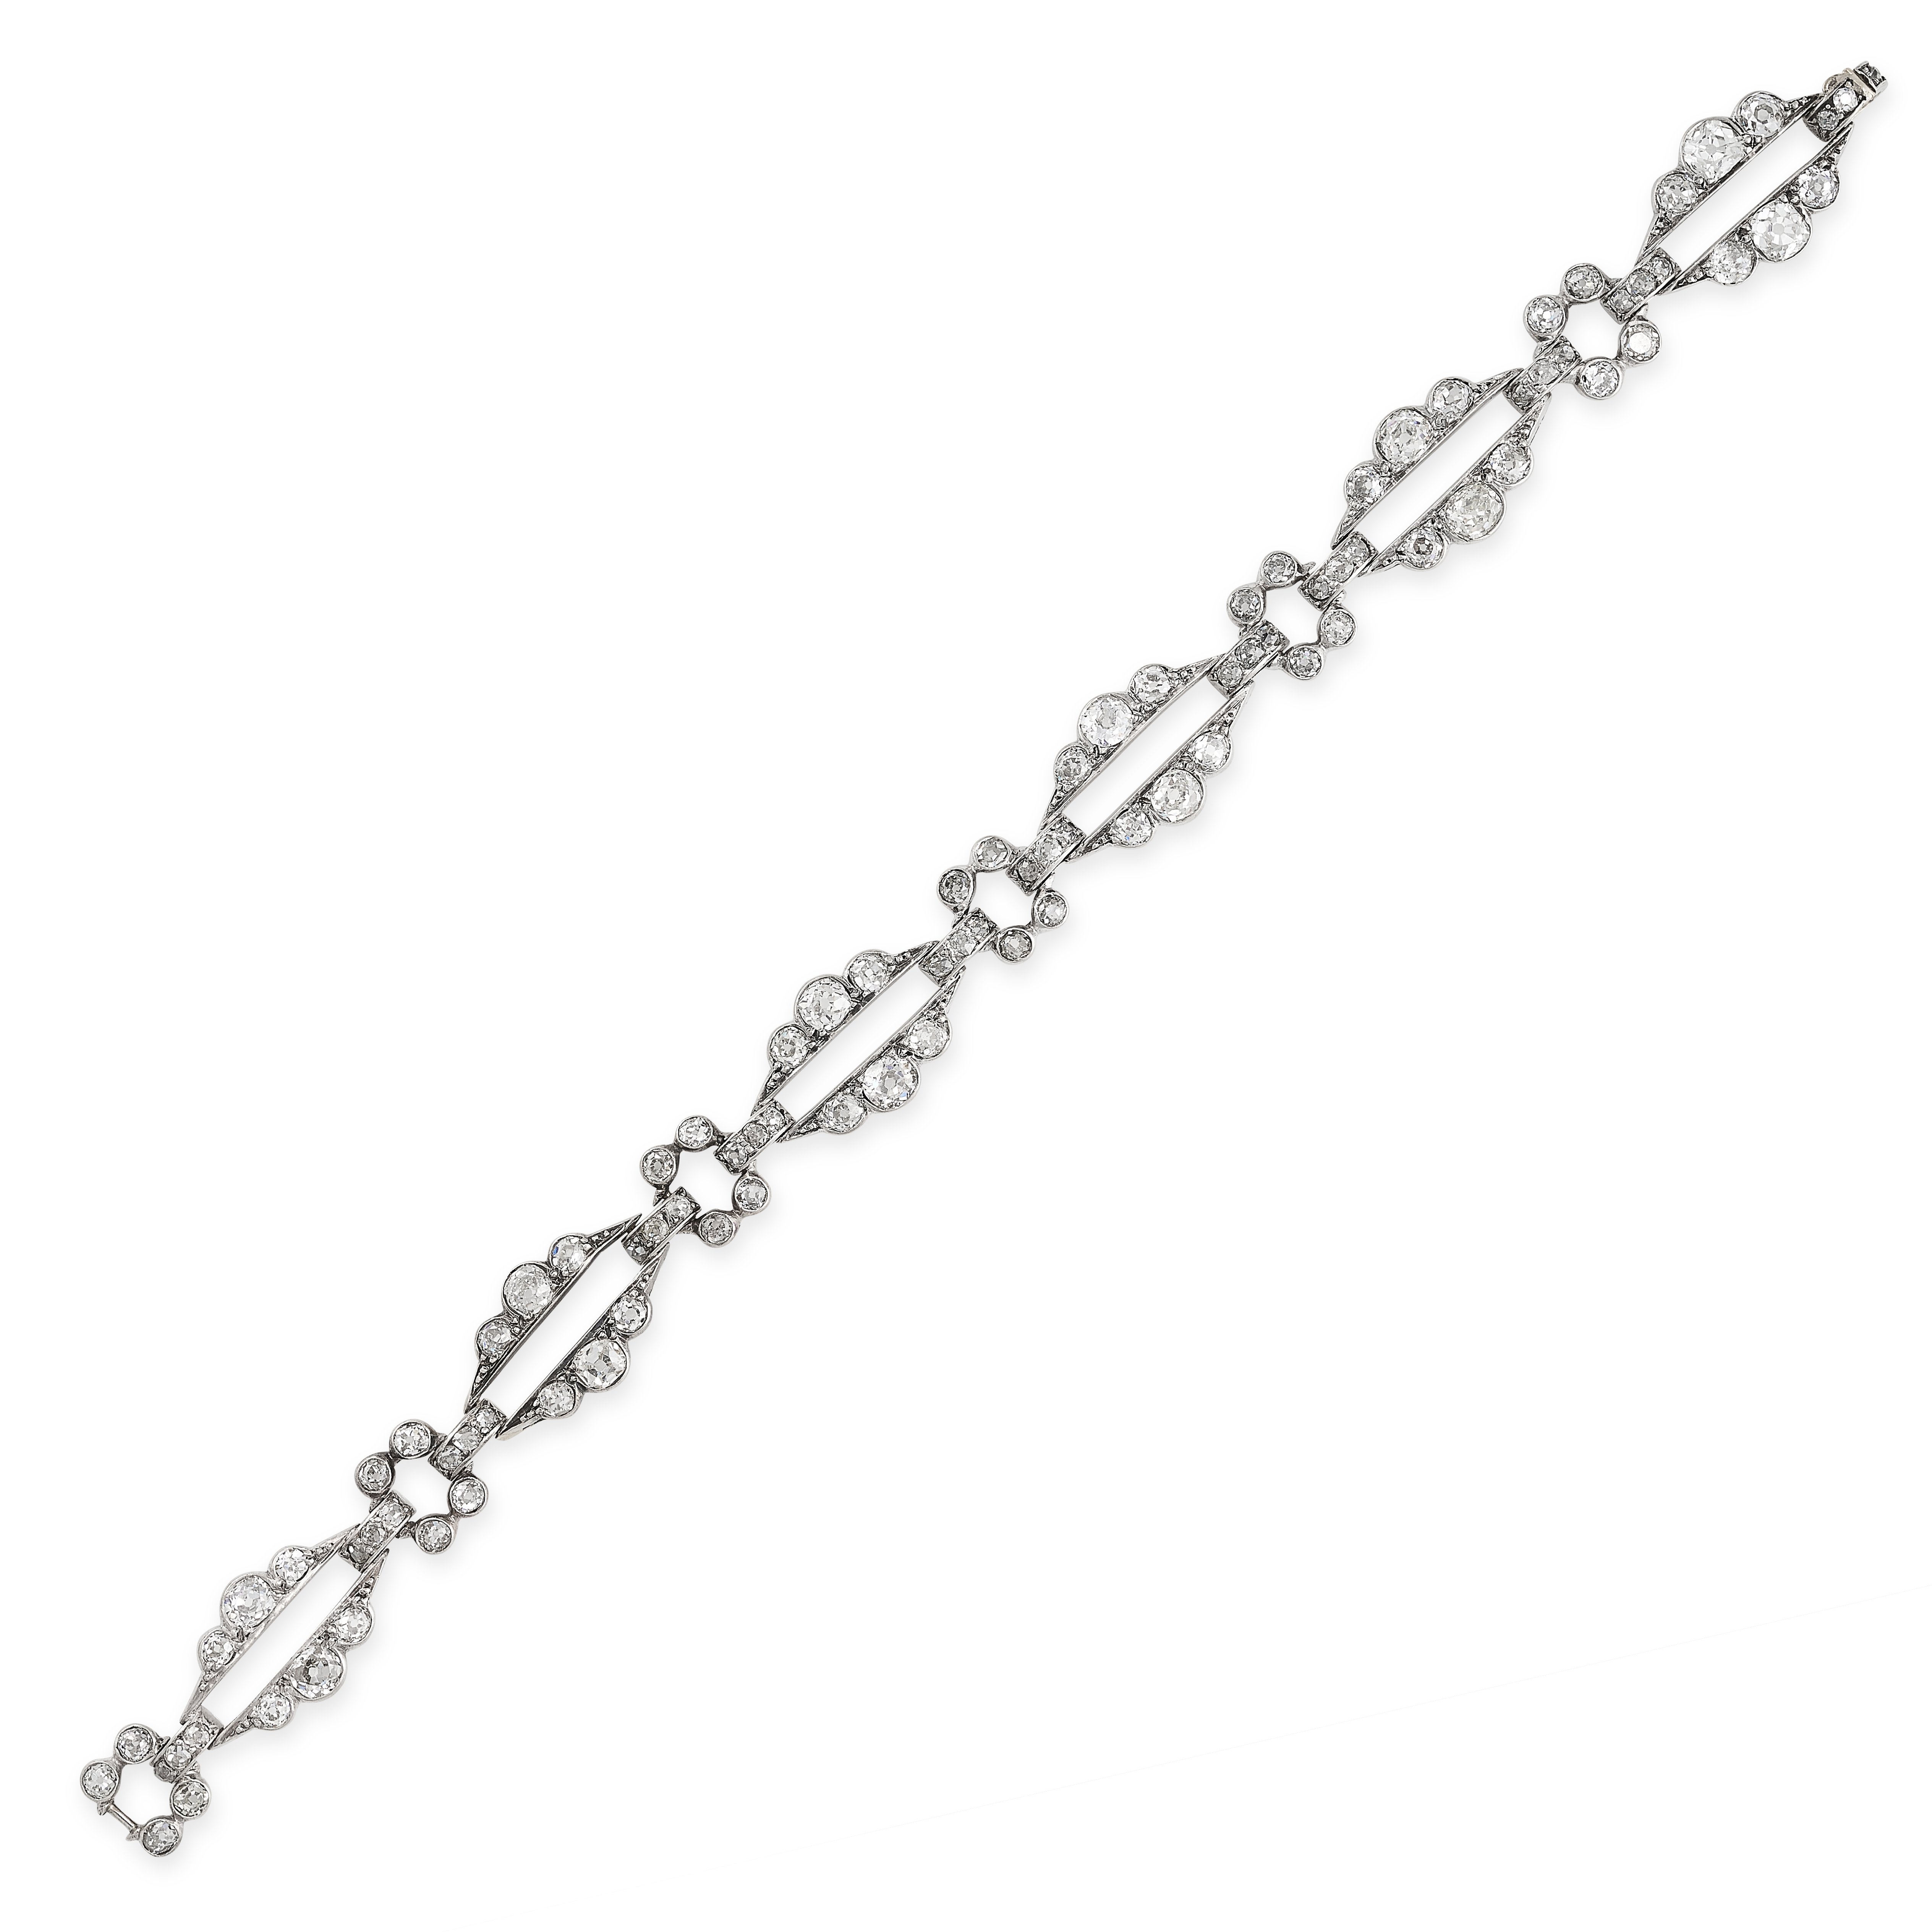 AN ANTIQUE DIAMOND BRACELET in silver and yellow gold, formed of a series of scalloped openwork